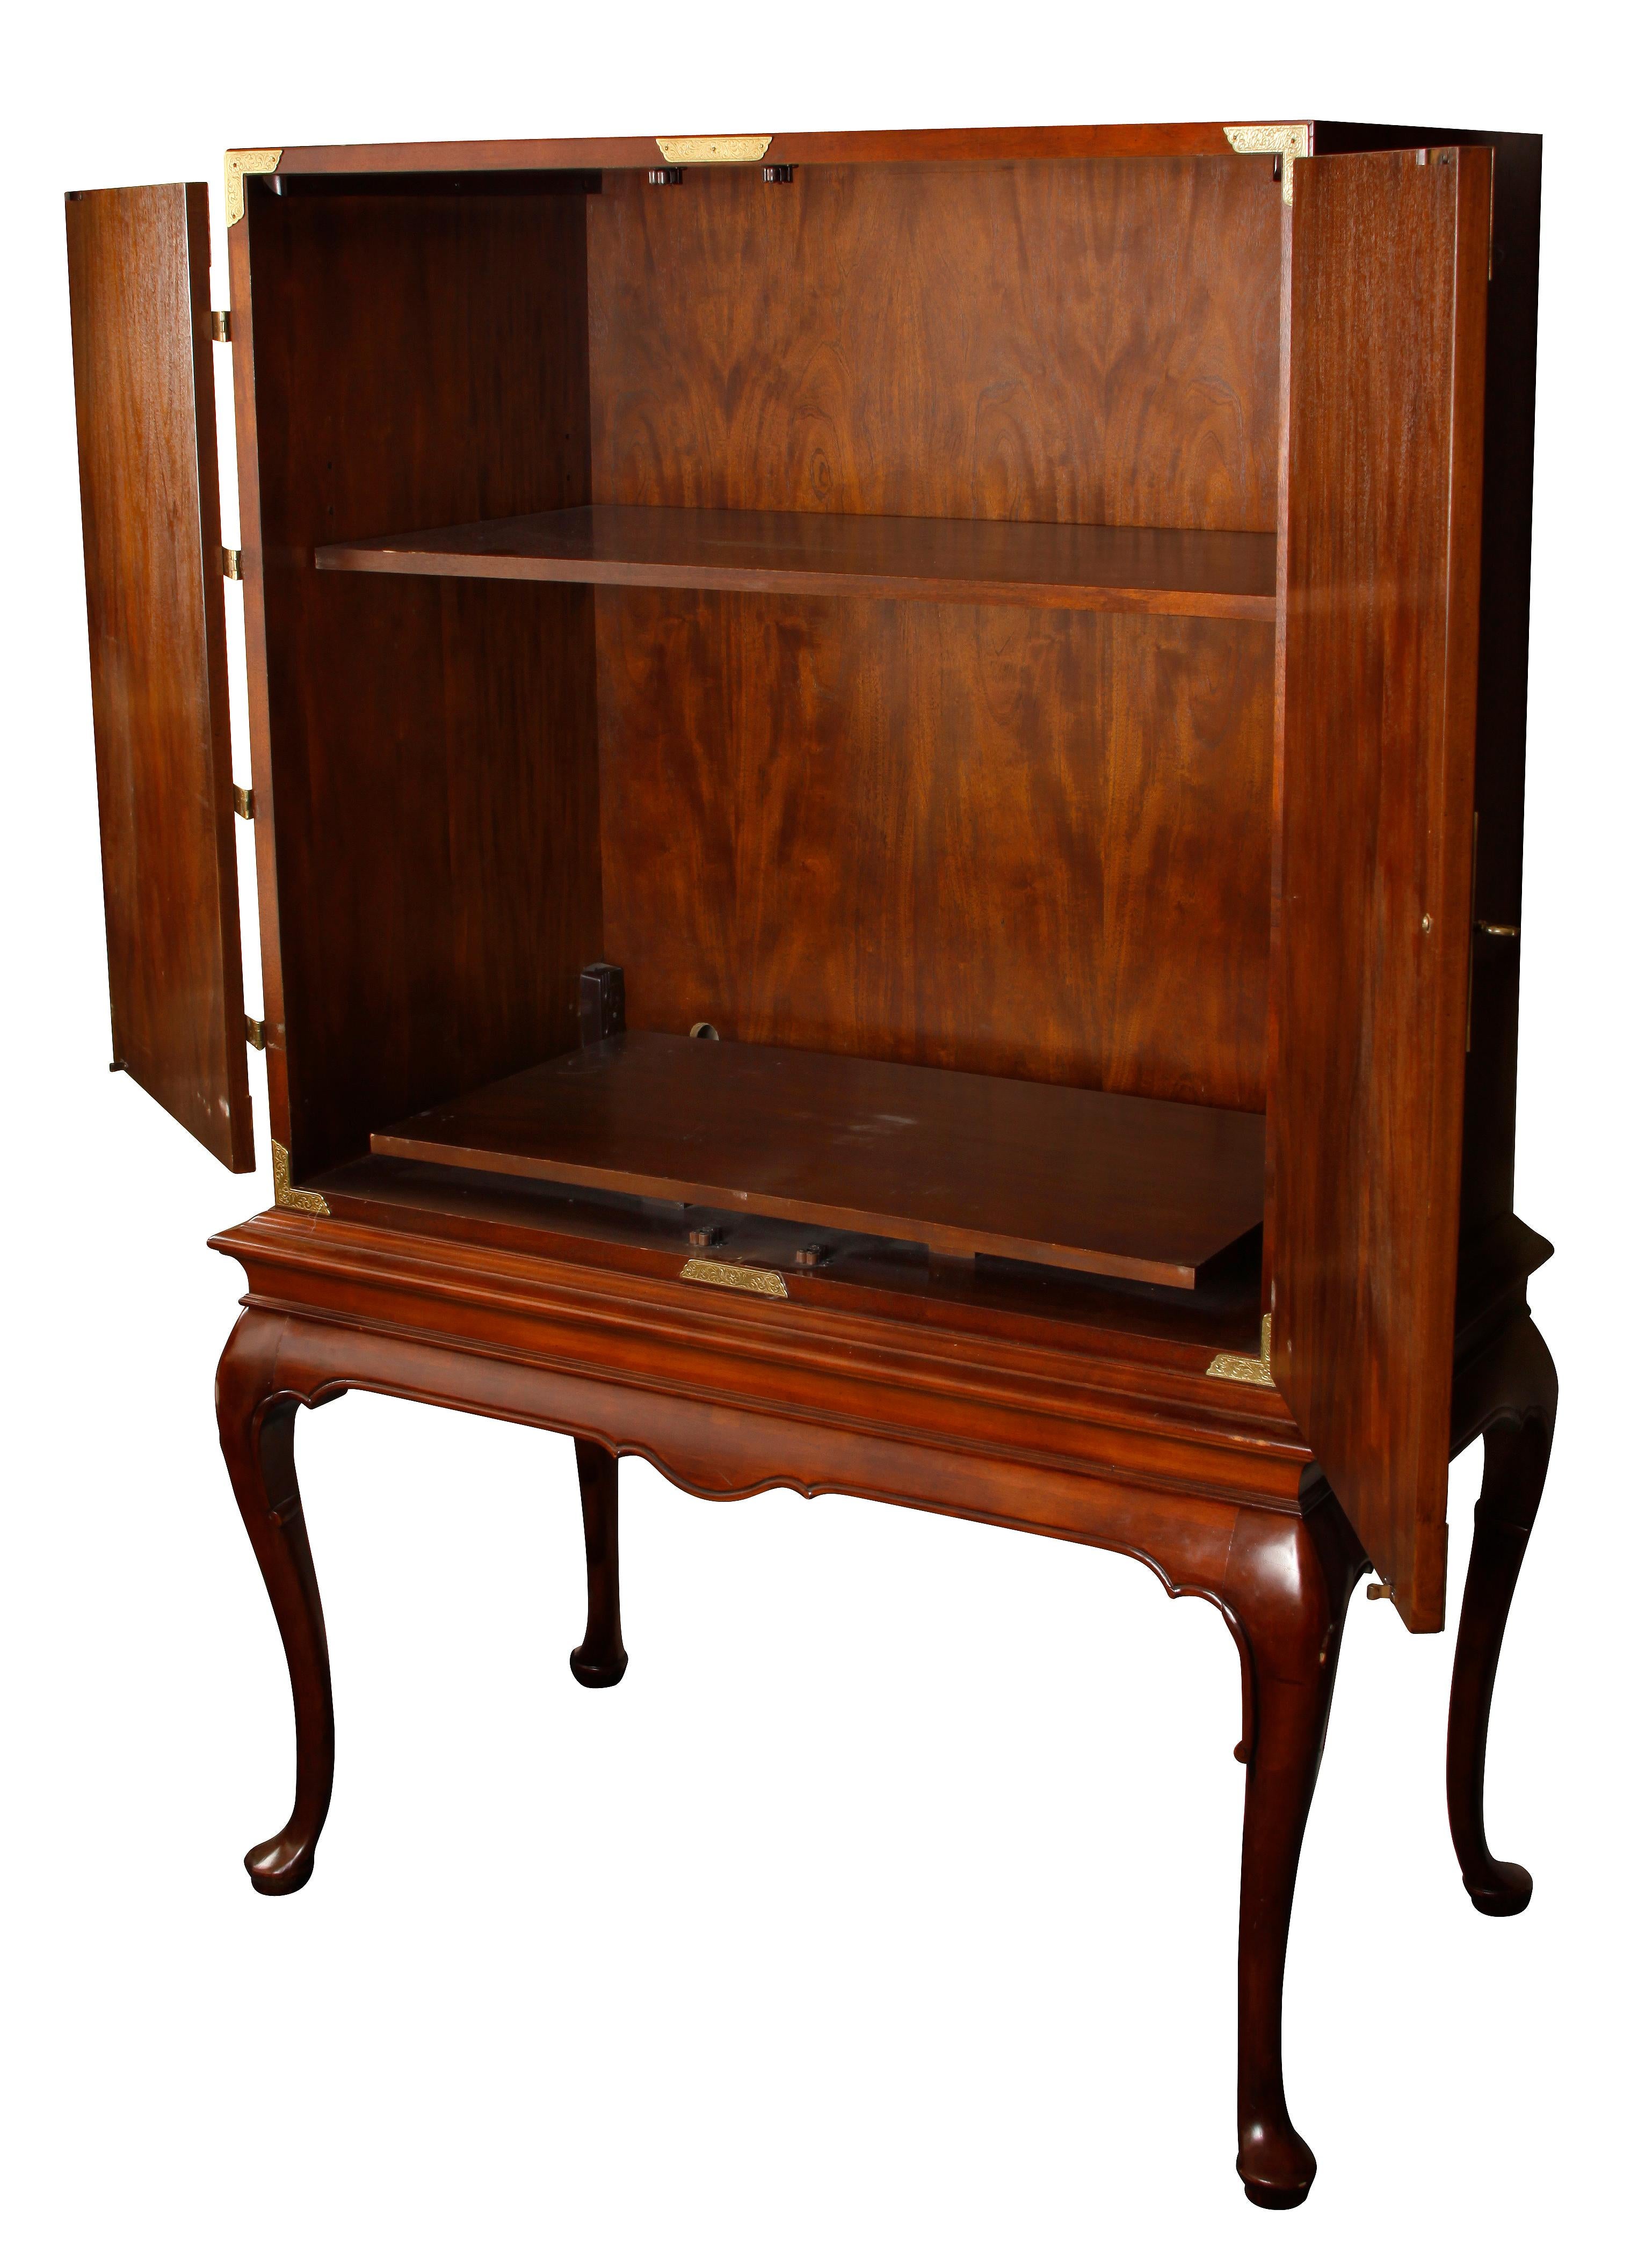 English and Asian influenced media cabinet with two-door panels. Opens to interior with two shelves and drilled in back for wiring. Cabinet sits on cabriole legs.